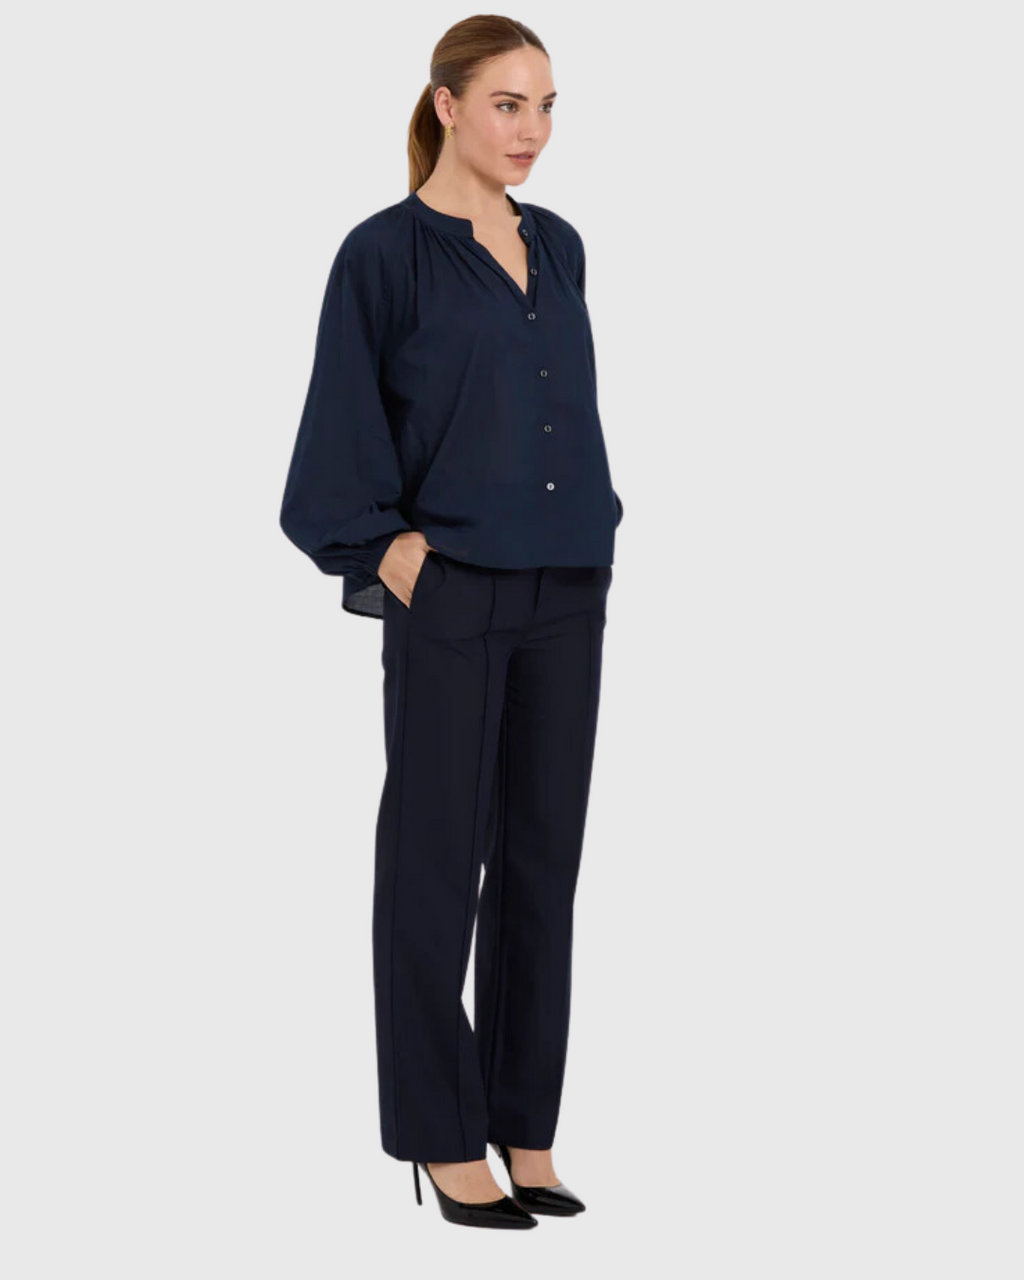 tuesday base pant navy suiting